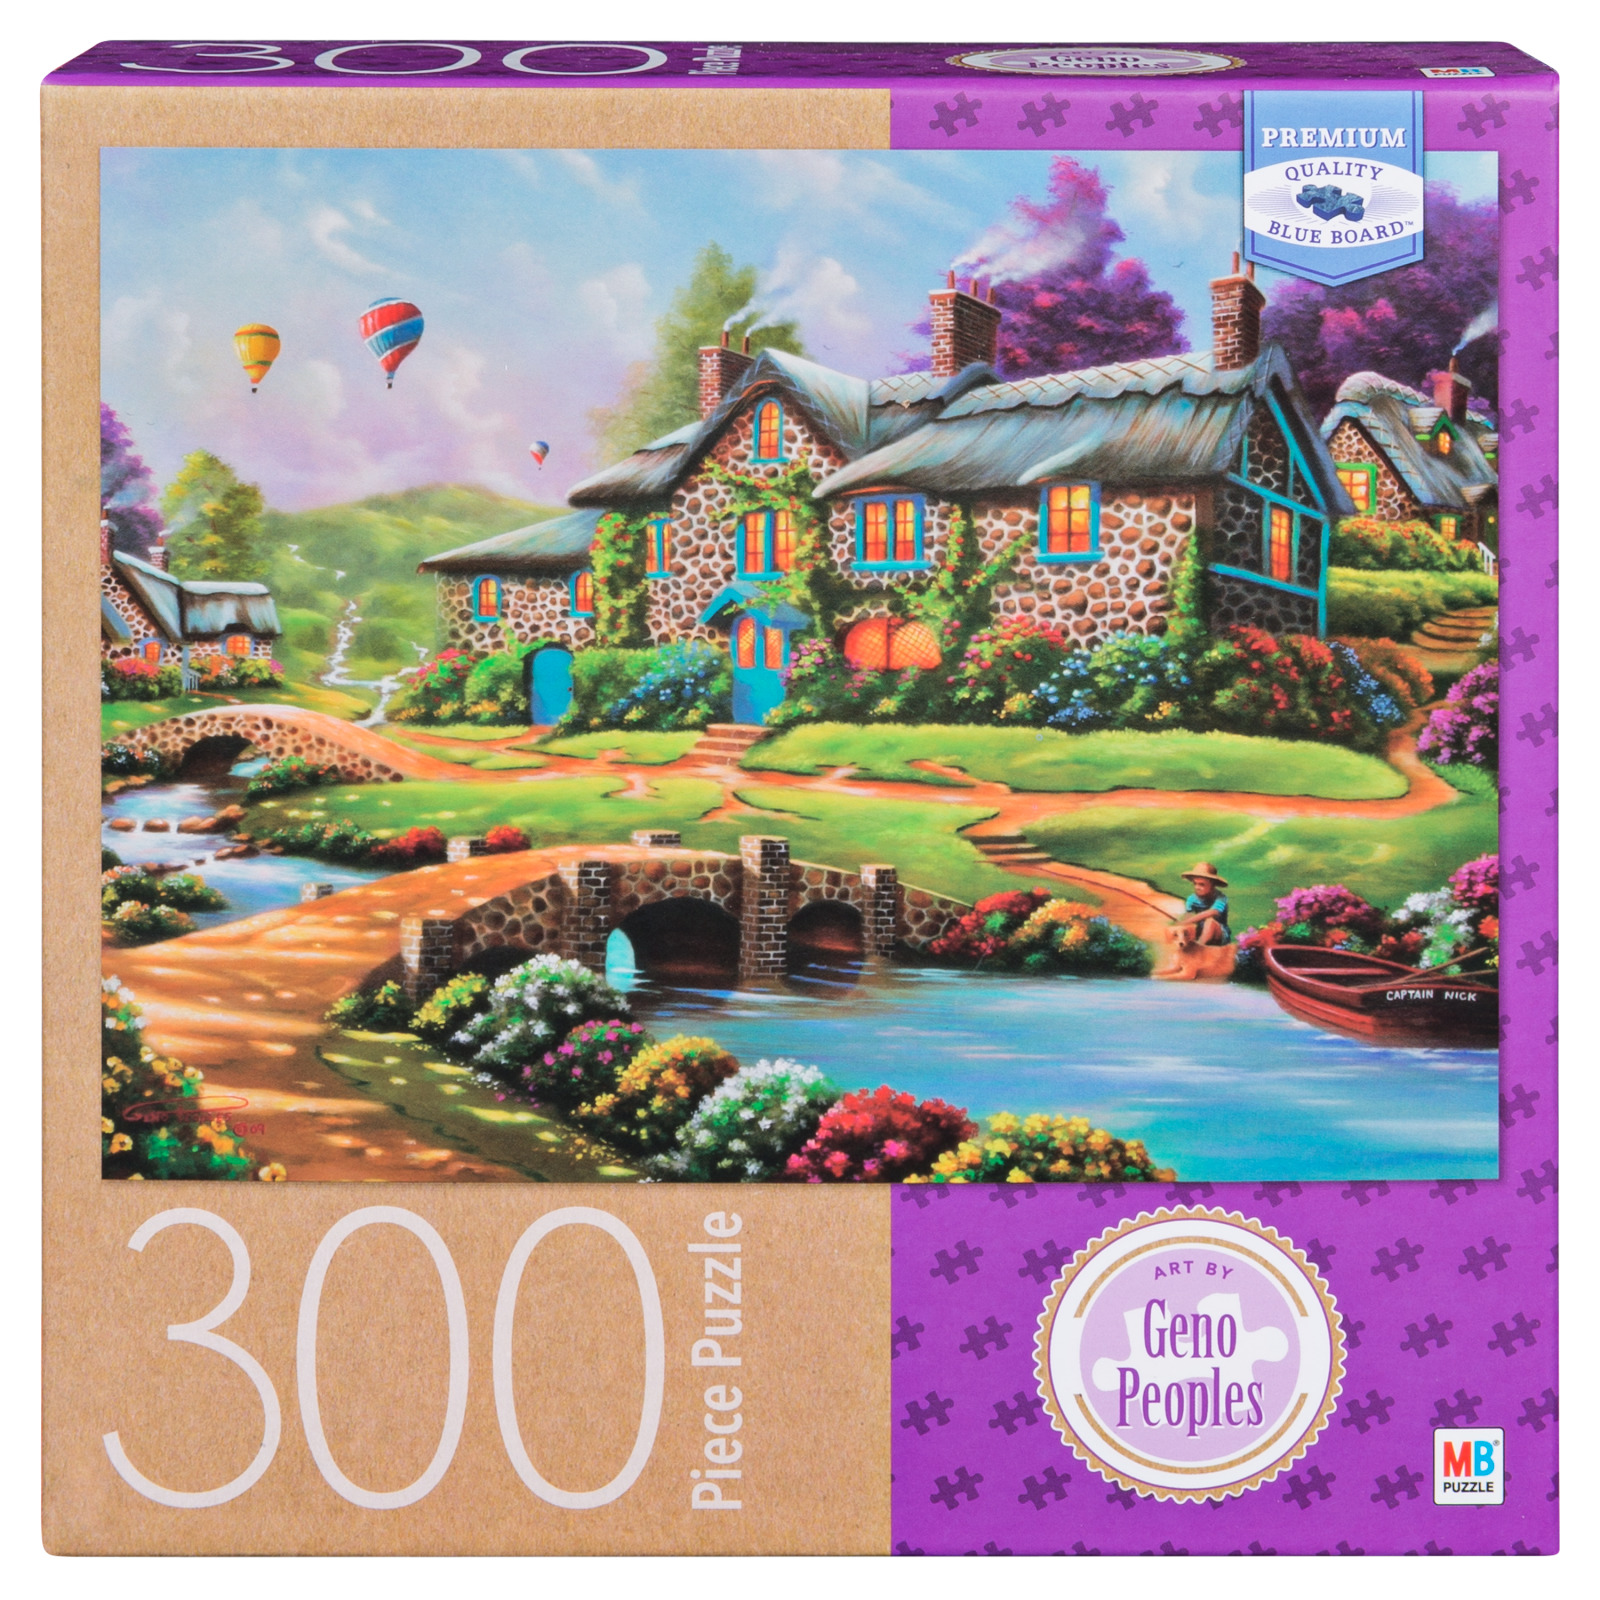 Artist Geno Peoples - 300-Piece Adult Jigsaw Puzzle - Dreamscape - image 1 of 1